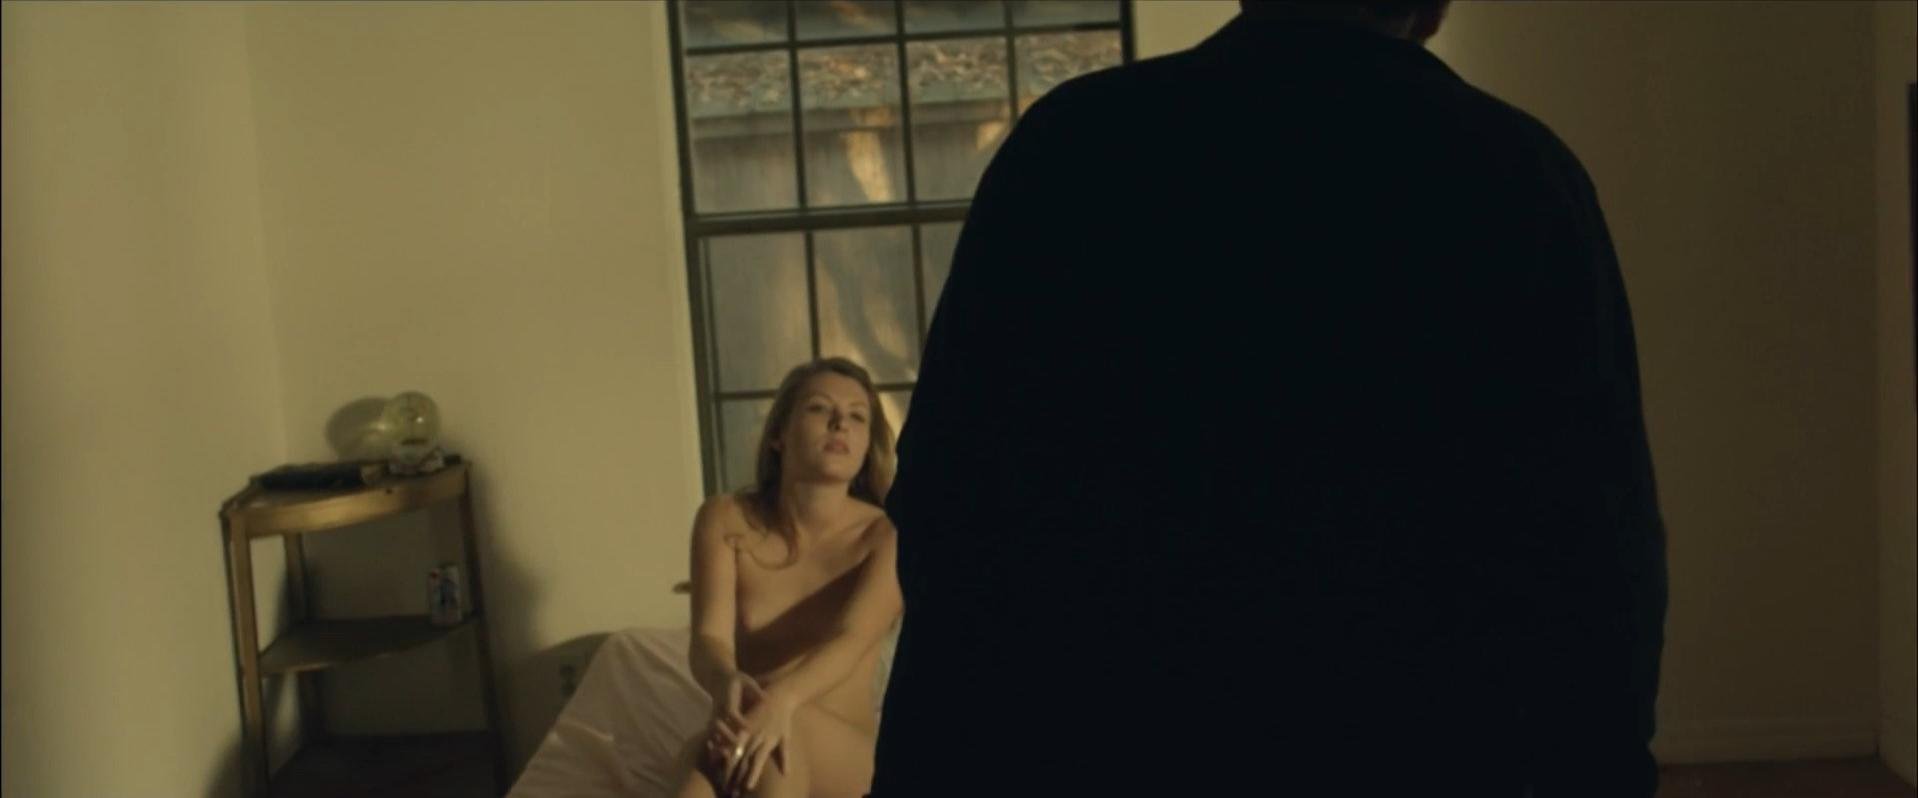 Emily Pearse in nude scene from Cliff which was released in 2013. 